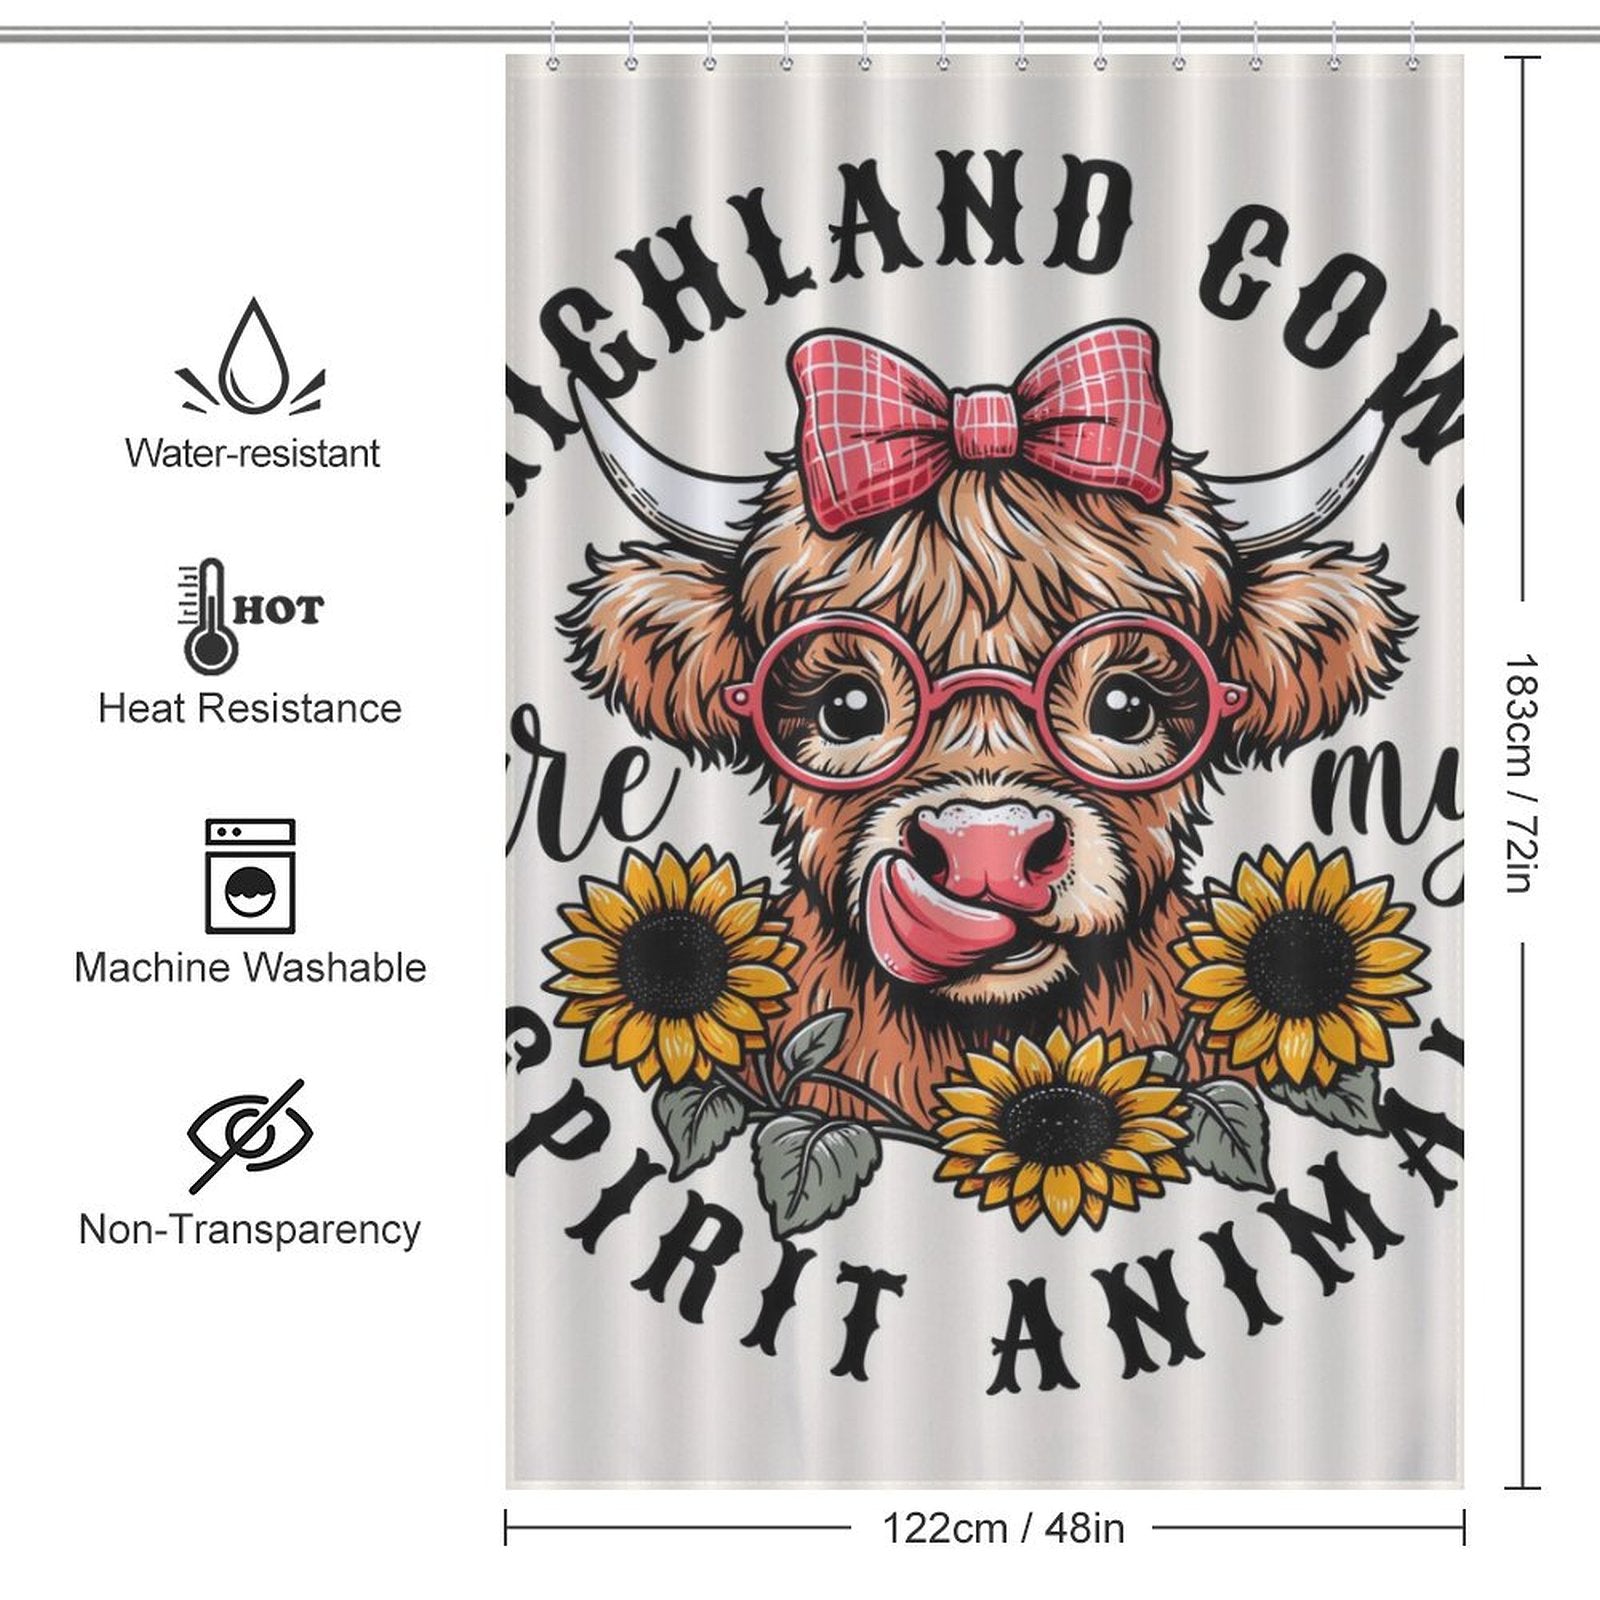 This image shows a cute cartoon of a highland cow with glasses and a bow on the **Cute Sunflower Glasses Highland Cow Shower Curtain-Cottoncat** by **Cotton Cat**, surrounded by sunflowers. Text around the cow reads "Highland cow is my spirit animal". Perfect for whimsical bathroom decor, dimensions, and features are listed.